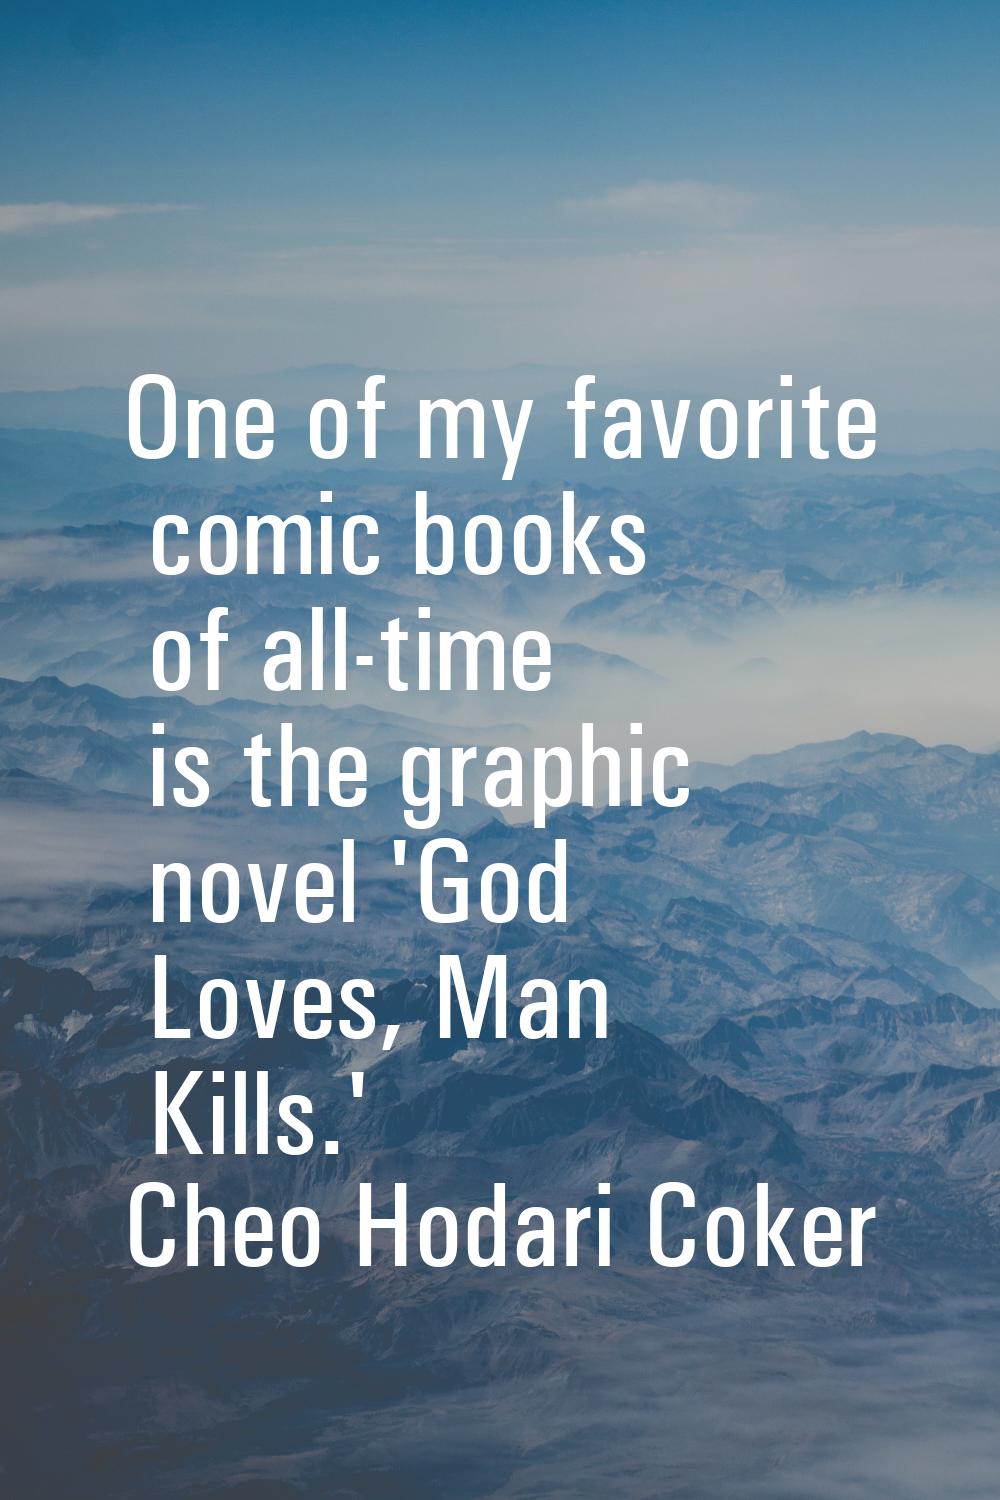 One of my favorite comic books of all-time is the graphic novel 'God Loves, Man Kills.'